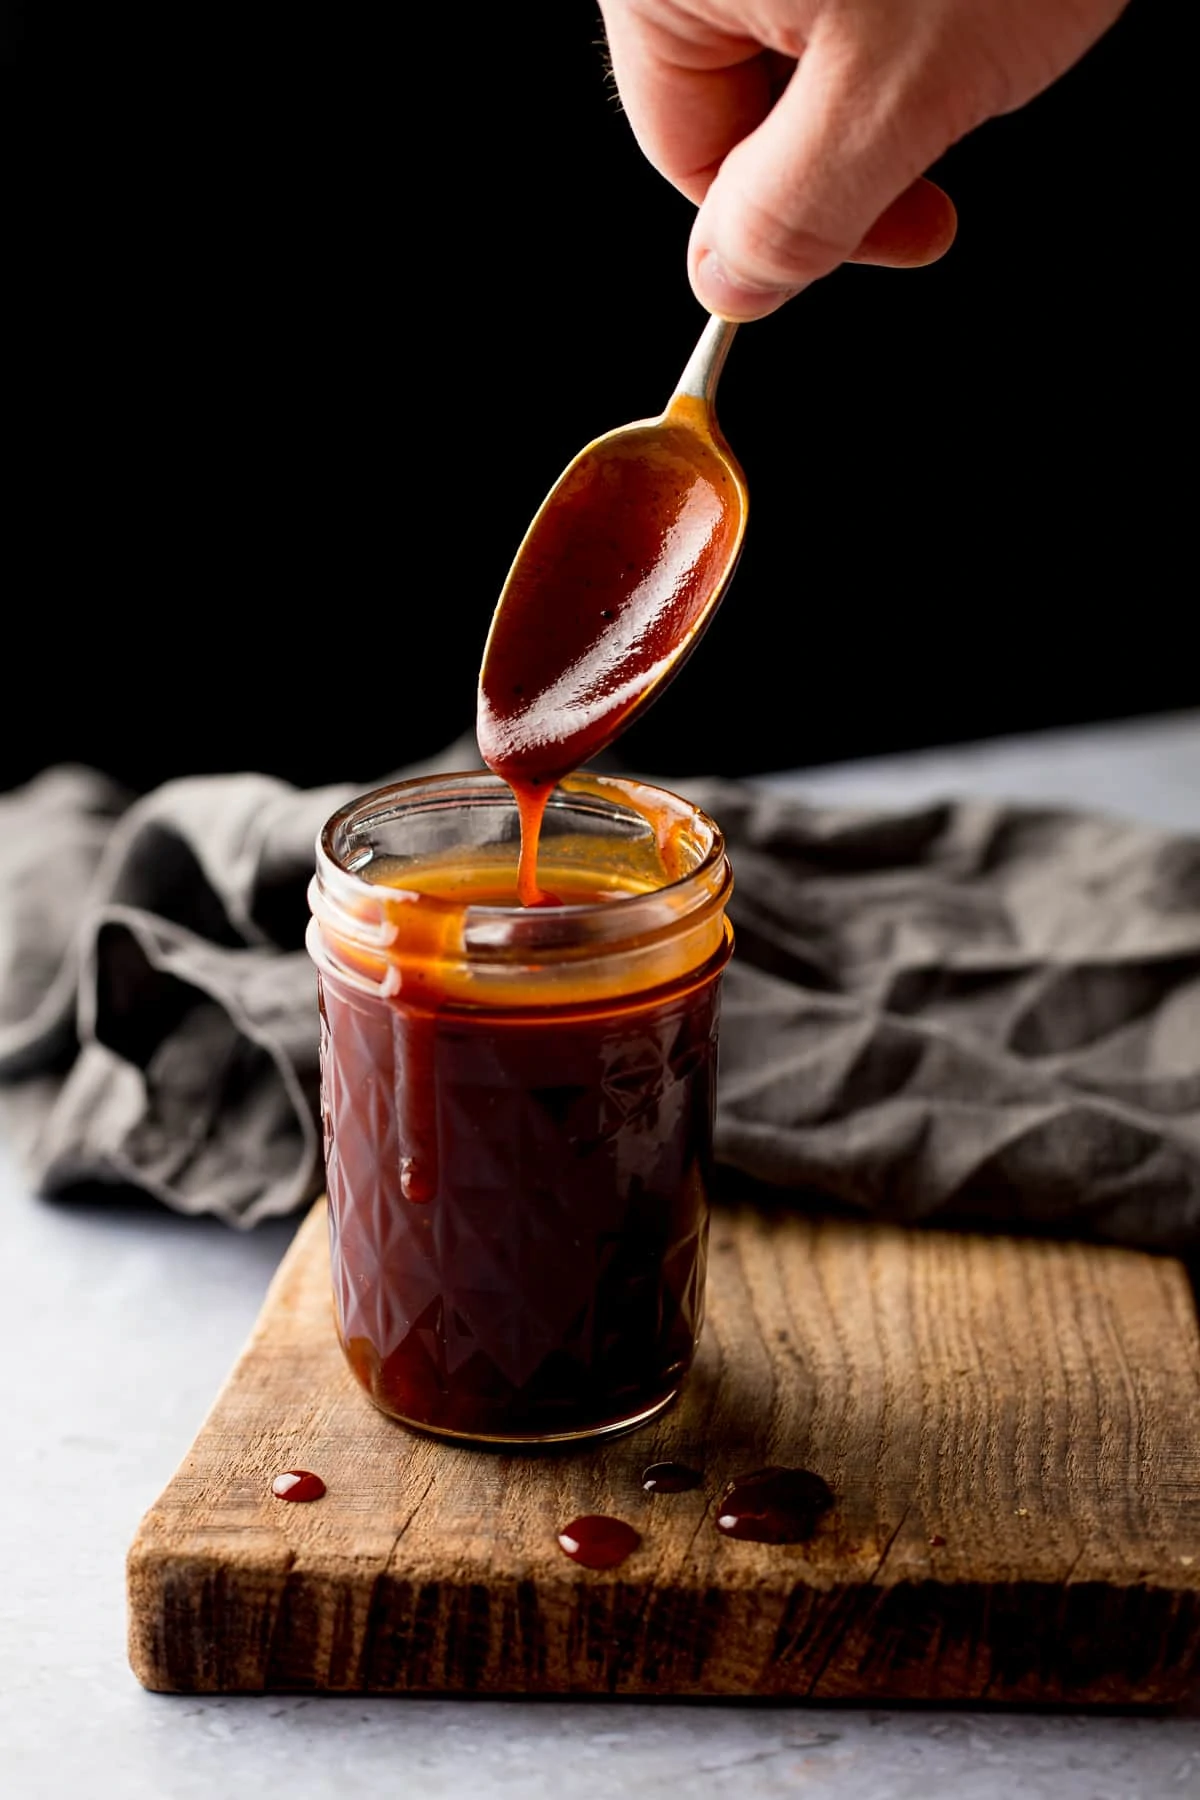 Spoonful being taken from a jar of homemade bbq sauce